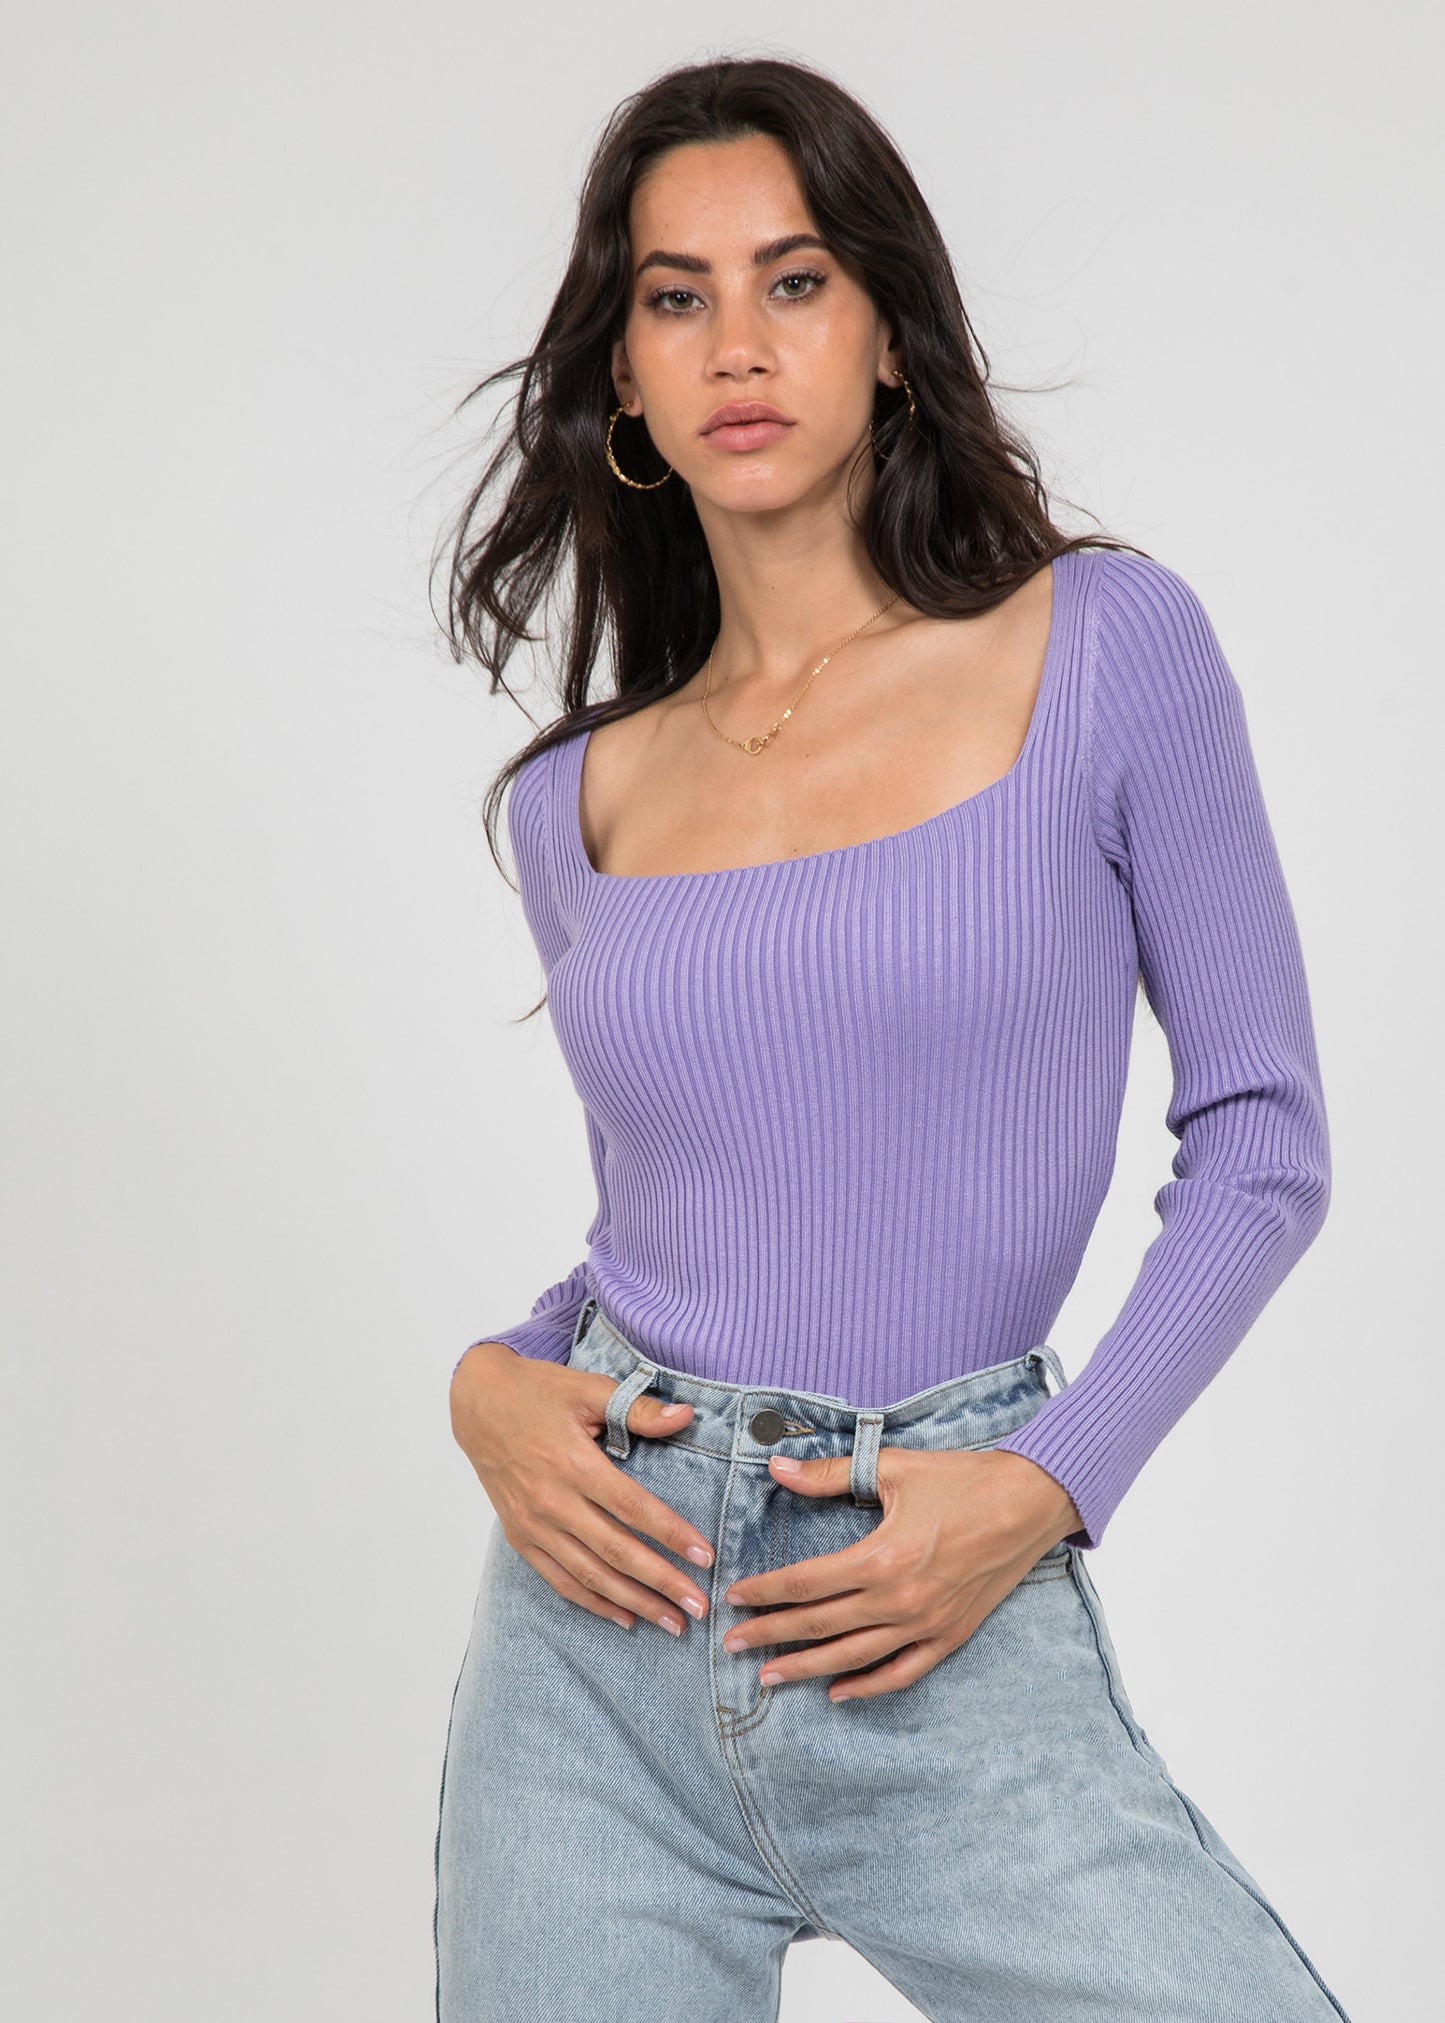 Ribbed square neck top in purple